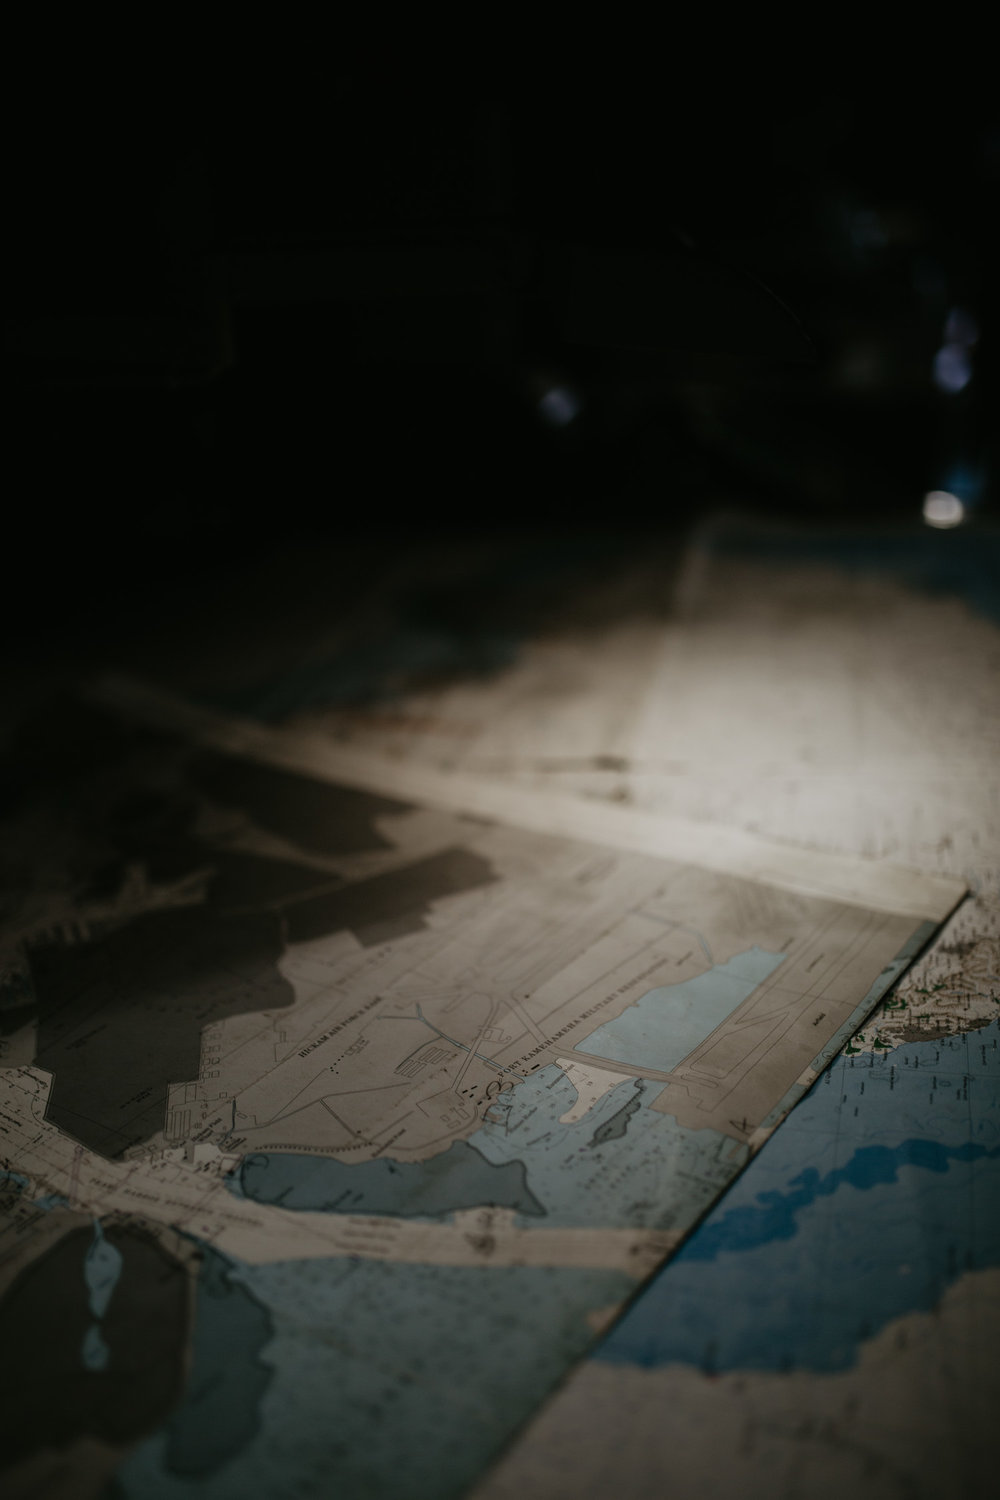  Imagine they are reading through these maps under this dim light… 